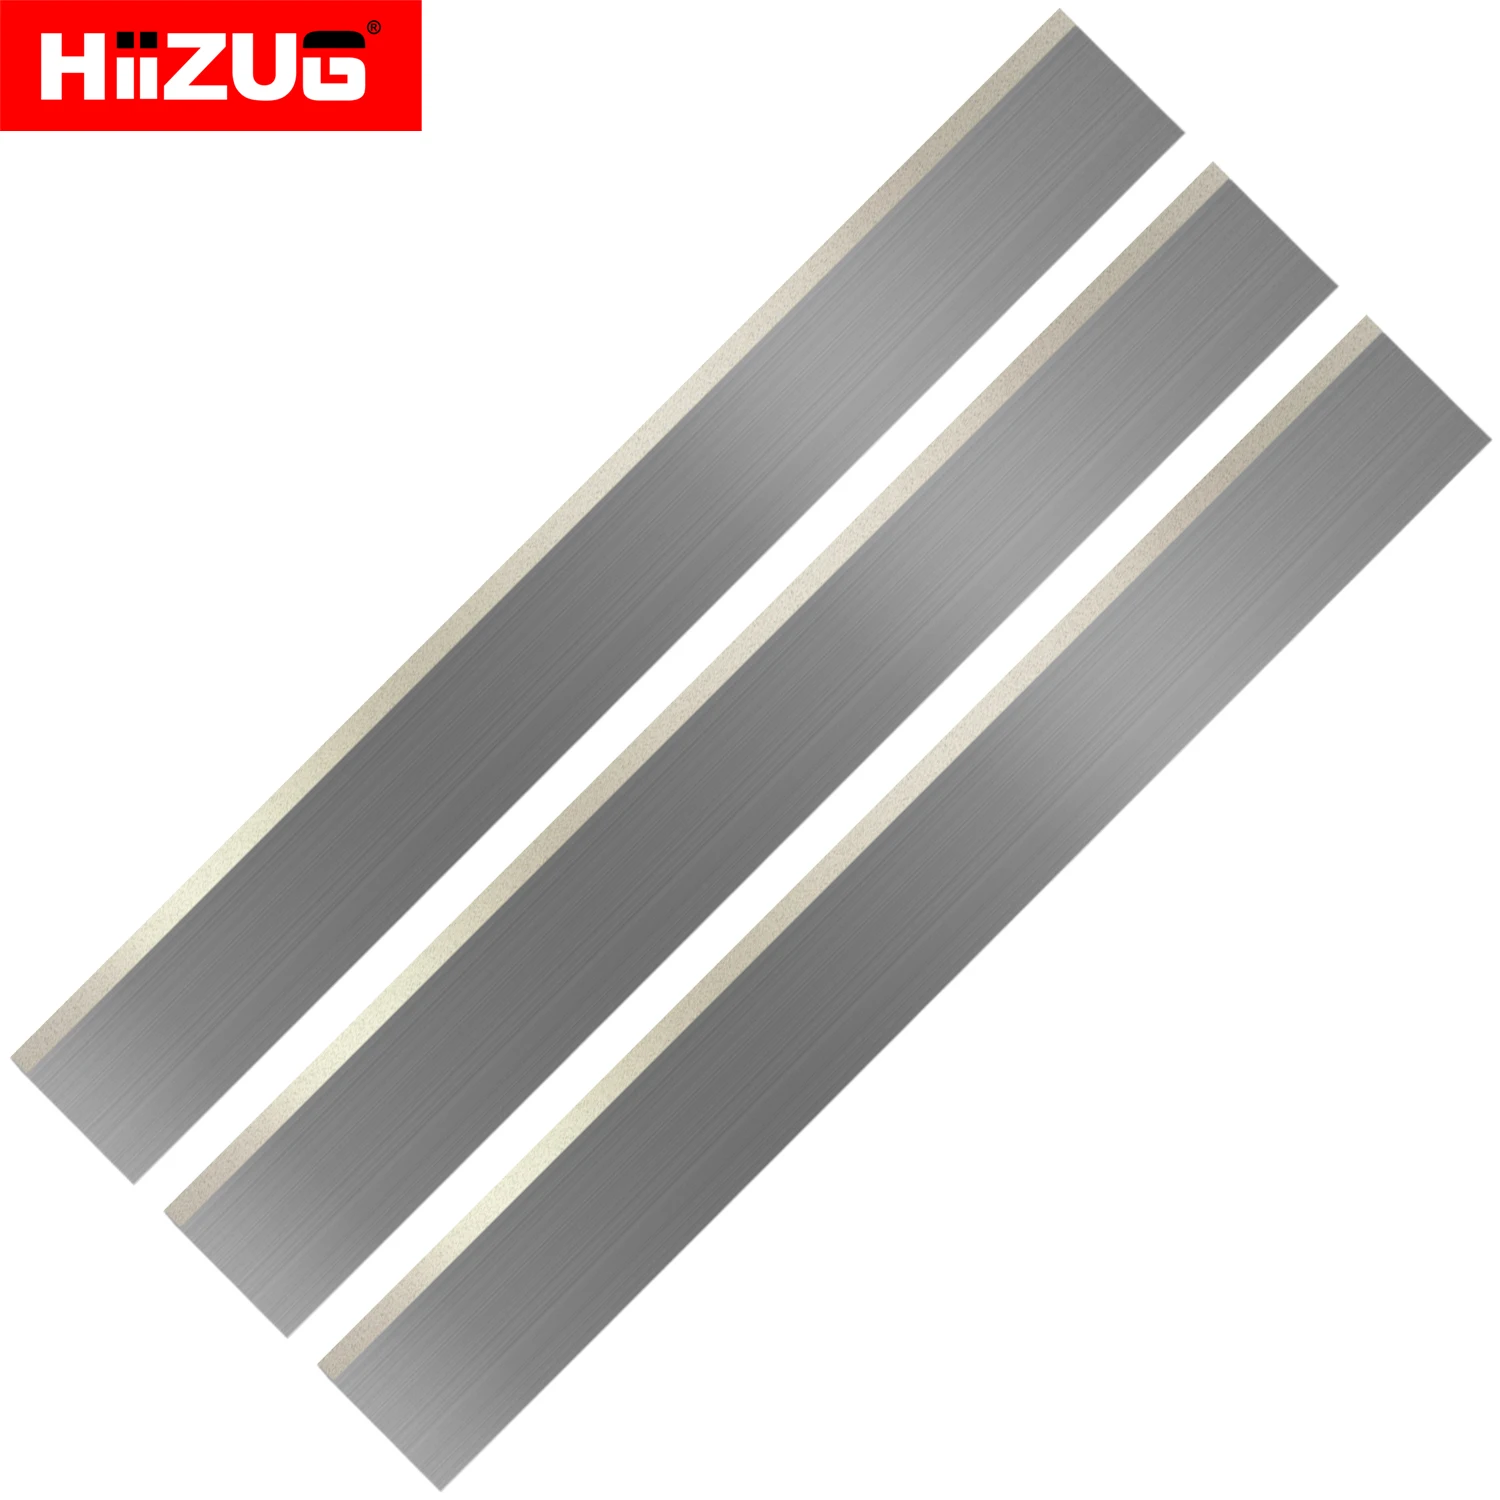 

11 Inch 280mm Planer Blades Knives 40mm Width for Electric Surface Thicknesser Planer Jointer Heads Machines HSS TCT 3 PCS